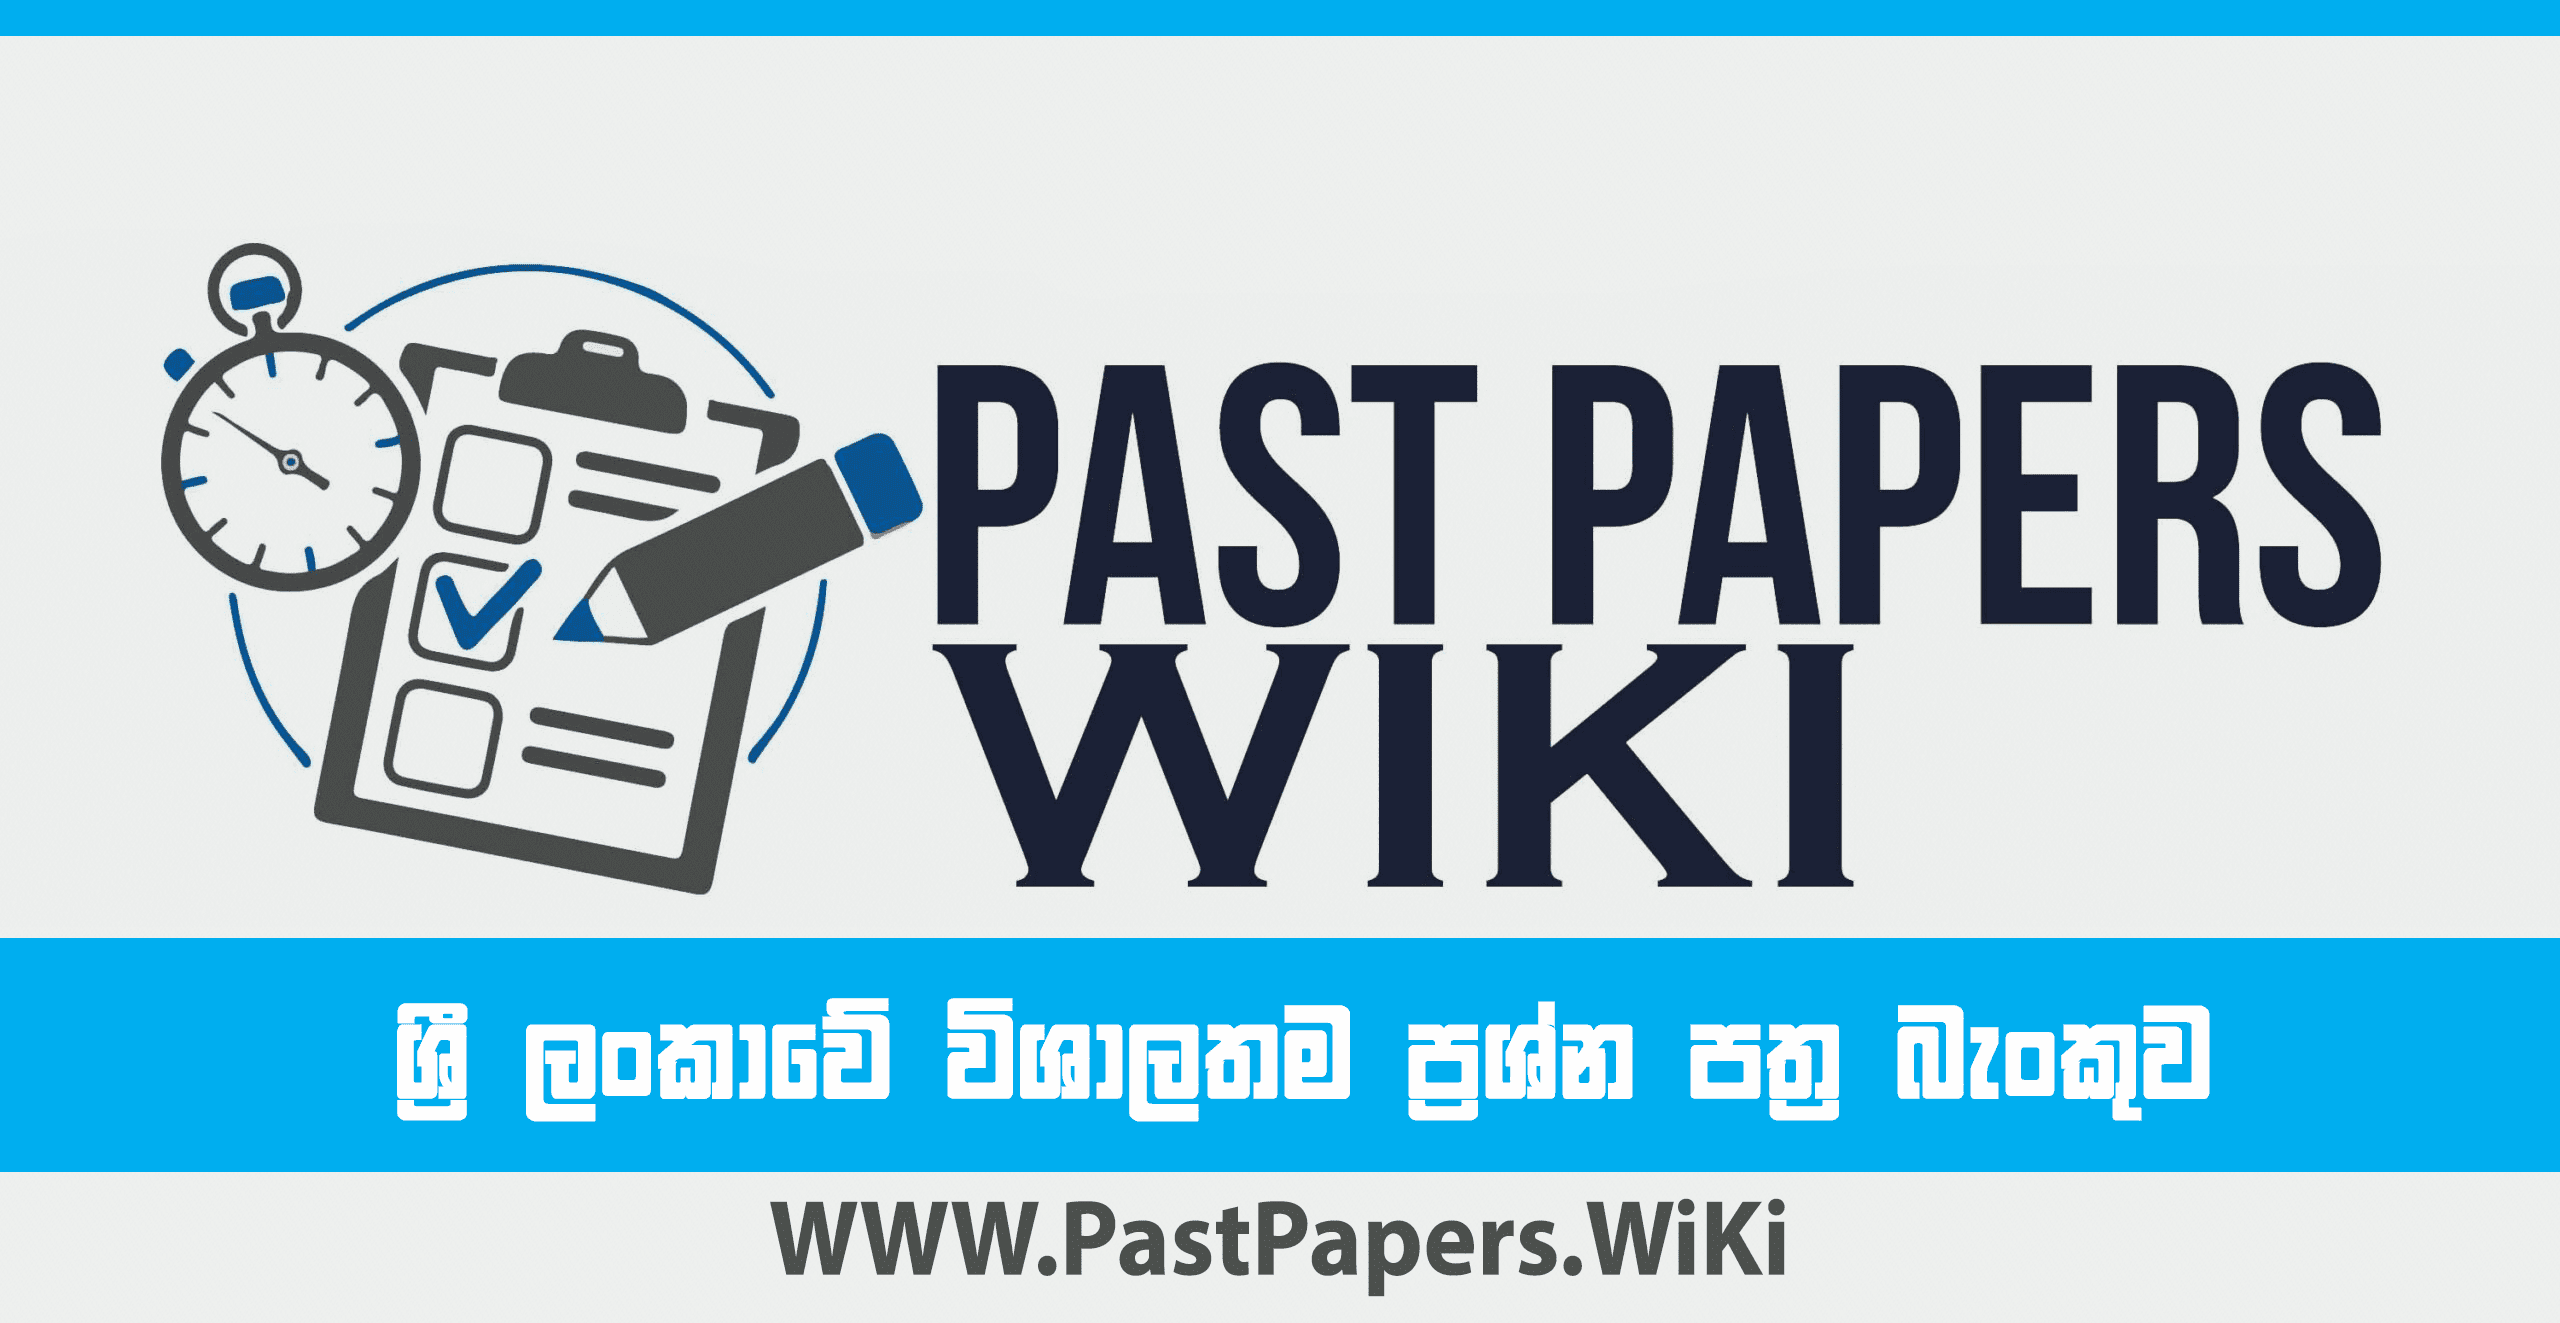 Past Papers WiKi - Most Extensive Wikipedia of Past Papers